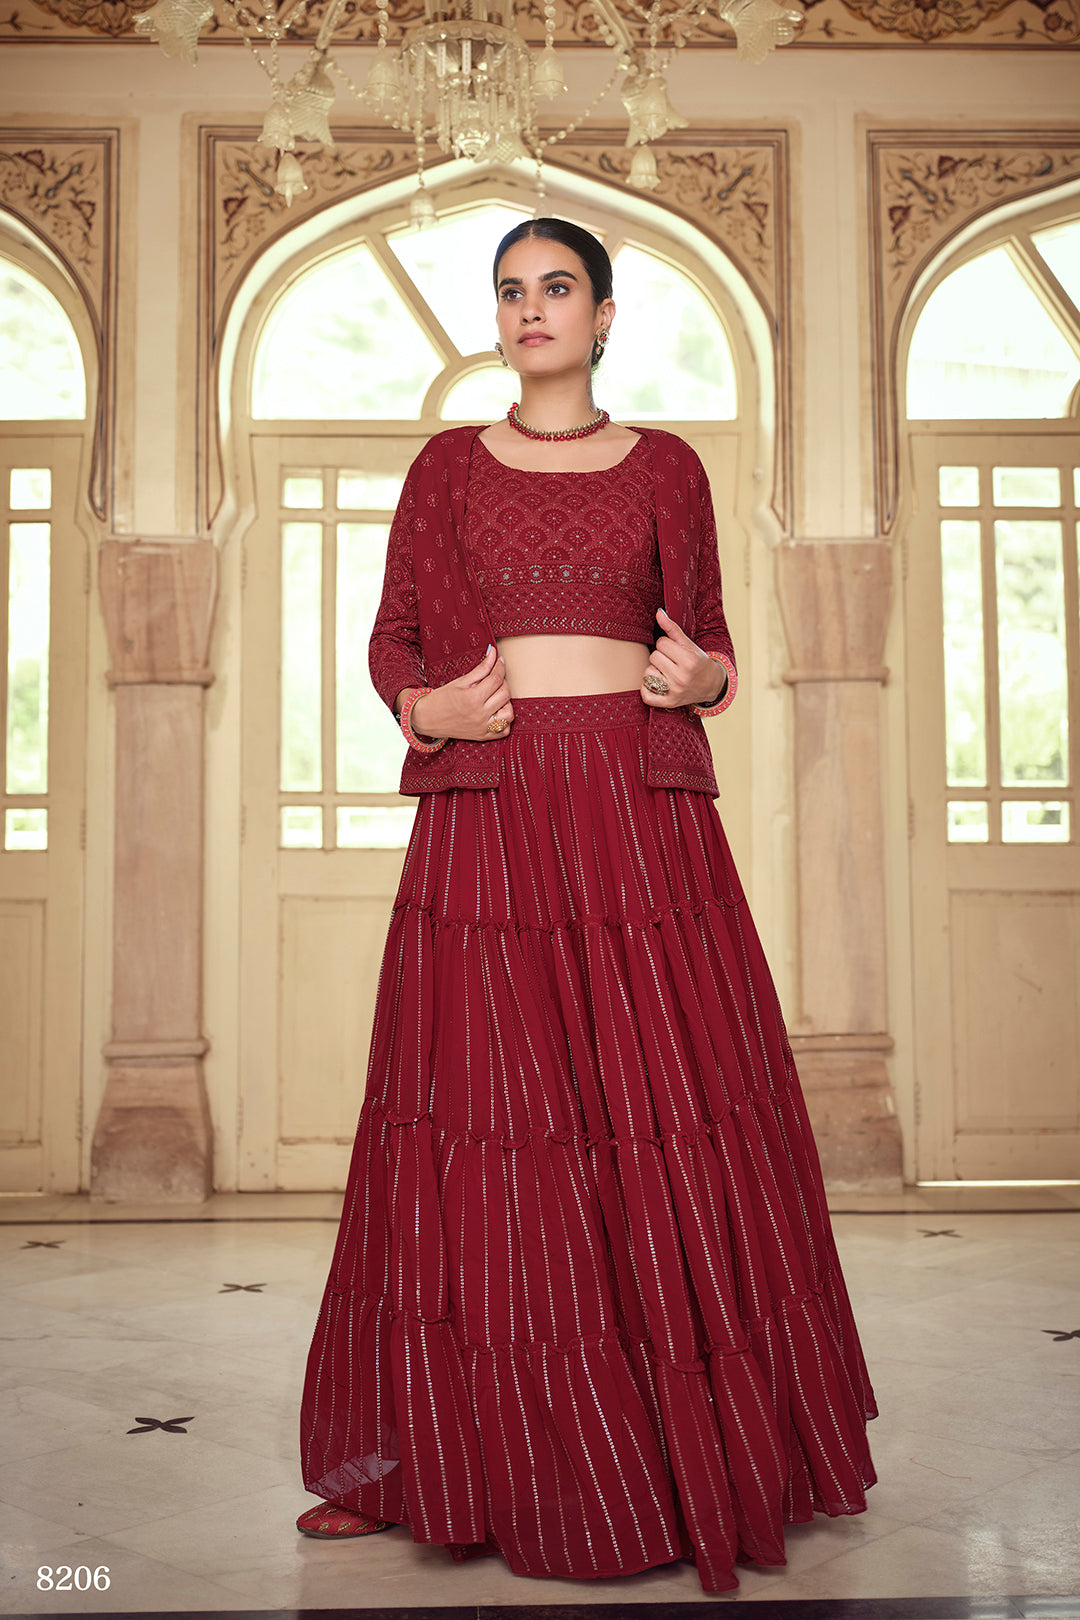 This Sabyasachi Bride Wore A Maroon Velvet Lehenga, Oomphed Her Look With  Double 'Dupatta'